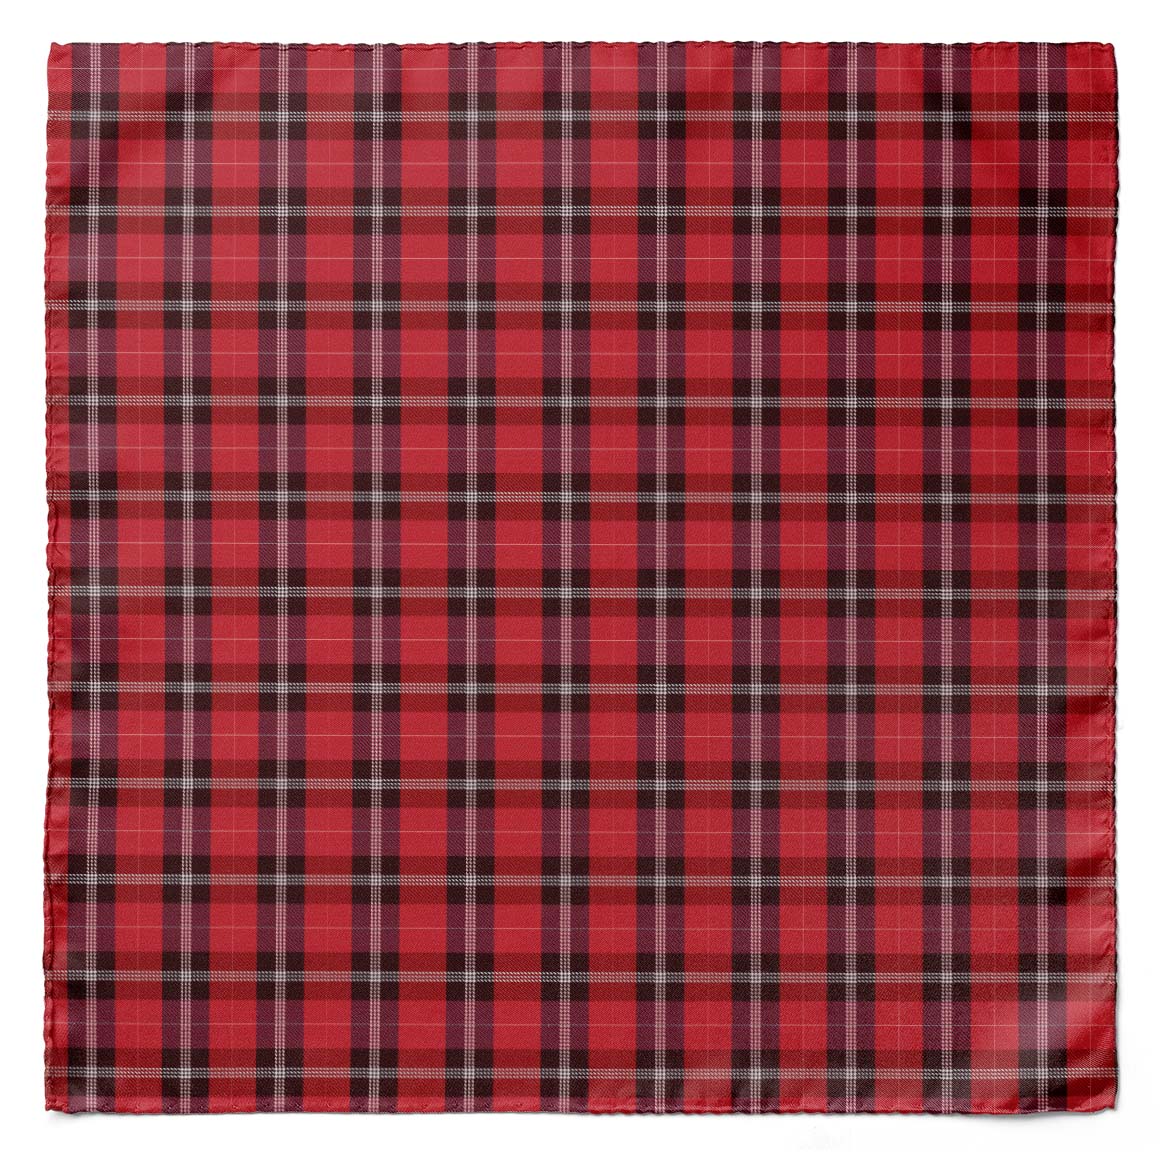 THE RED CLASSIC PLAID SILK SCARF